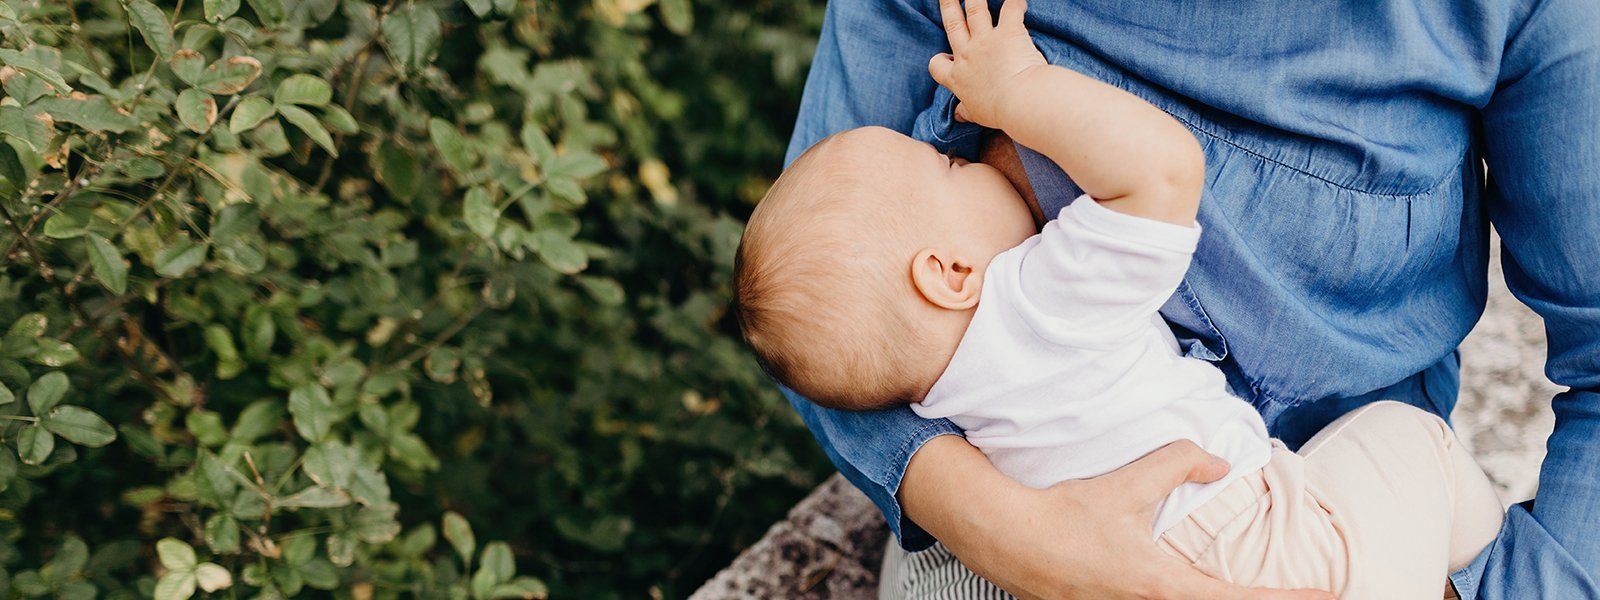 Simple and Natural Answers to Common Breastfeeding Questions